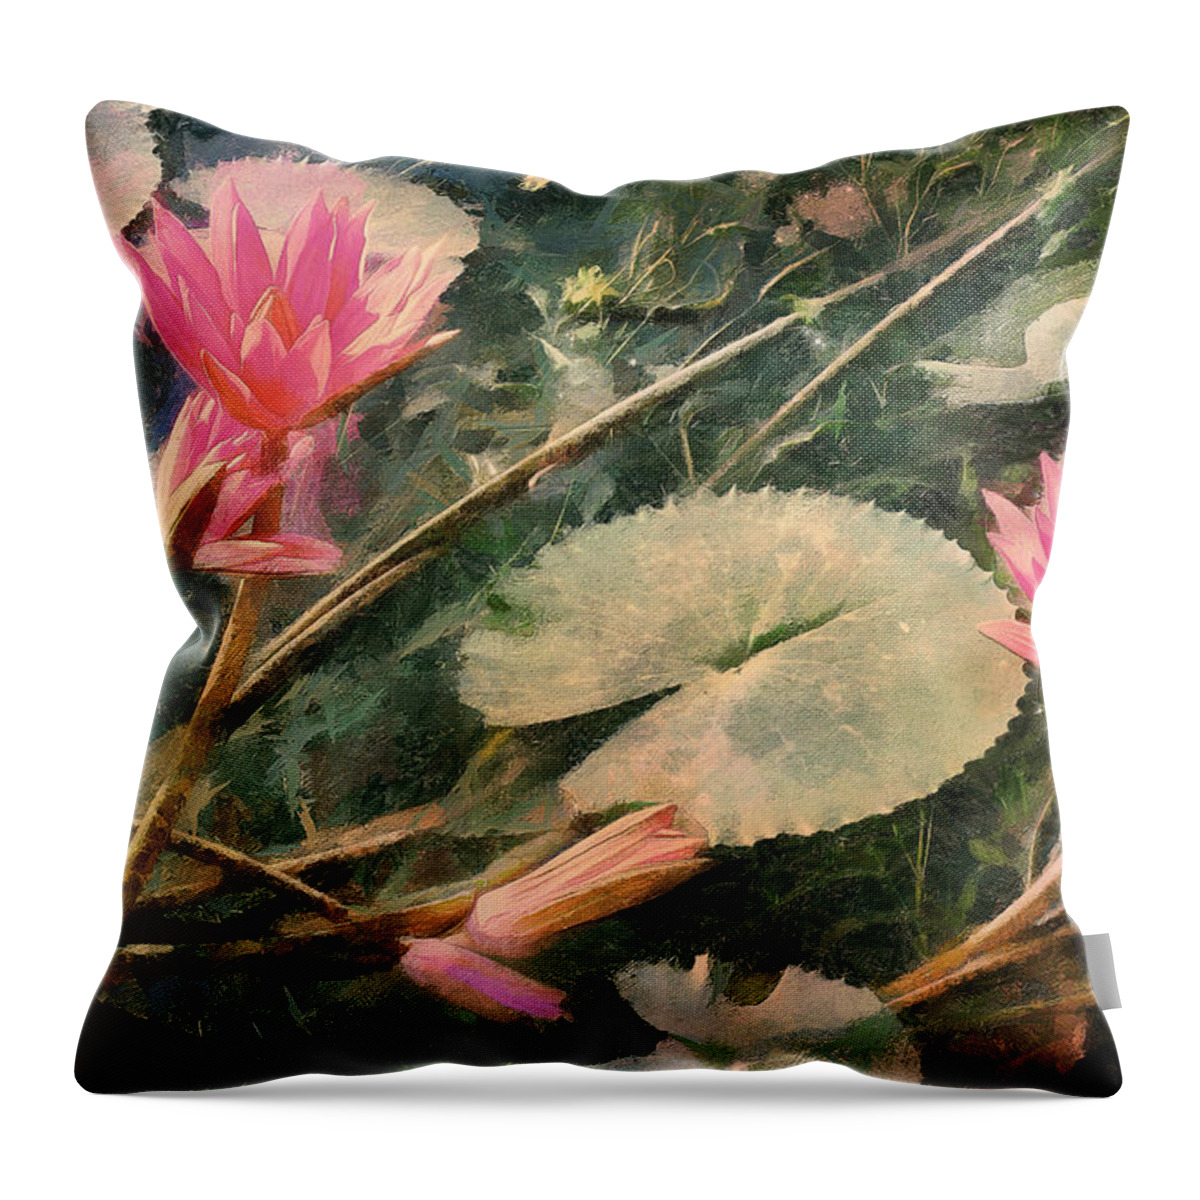 Water Lilies Throw Pillow featuring the digital art Water Lilies In A Stream by Bernie Lee